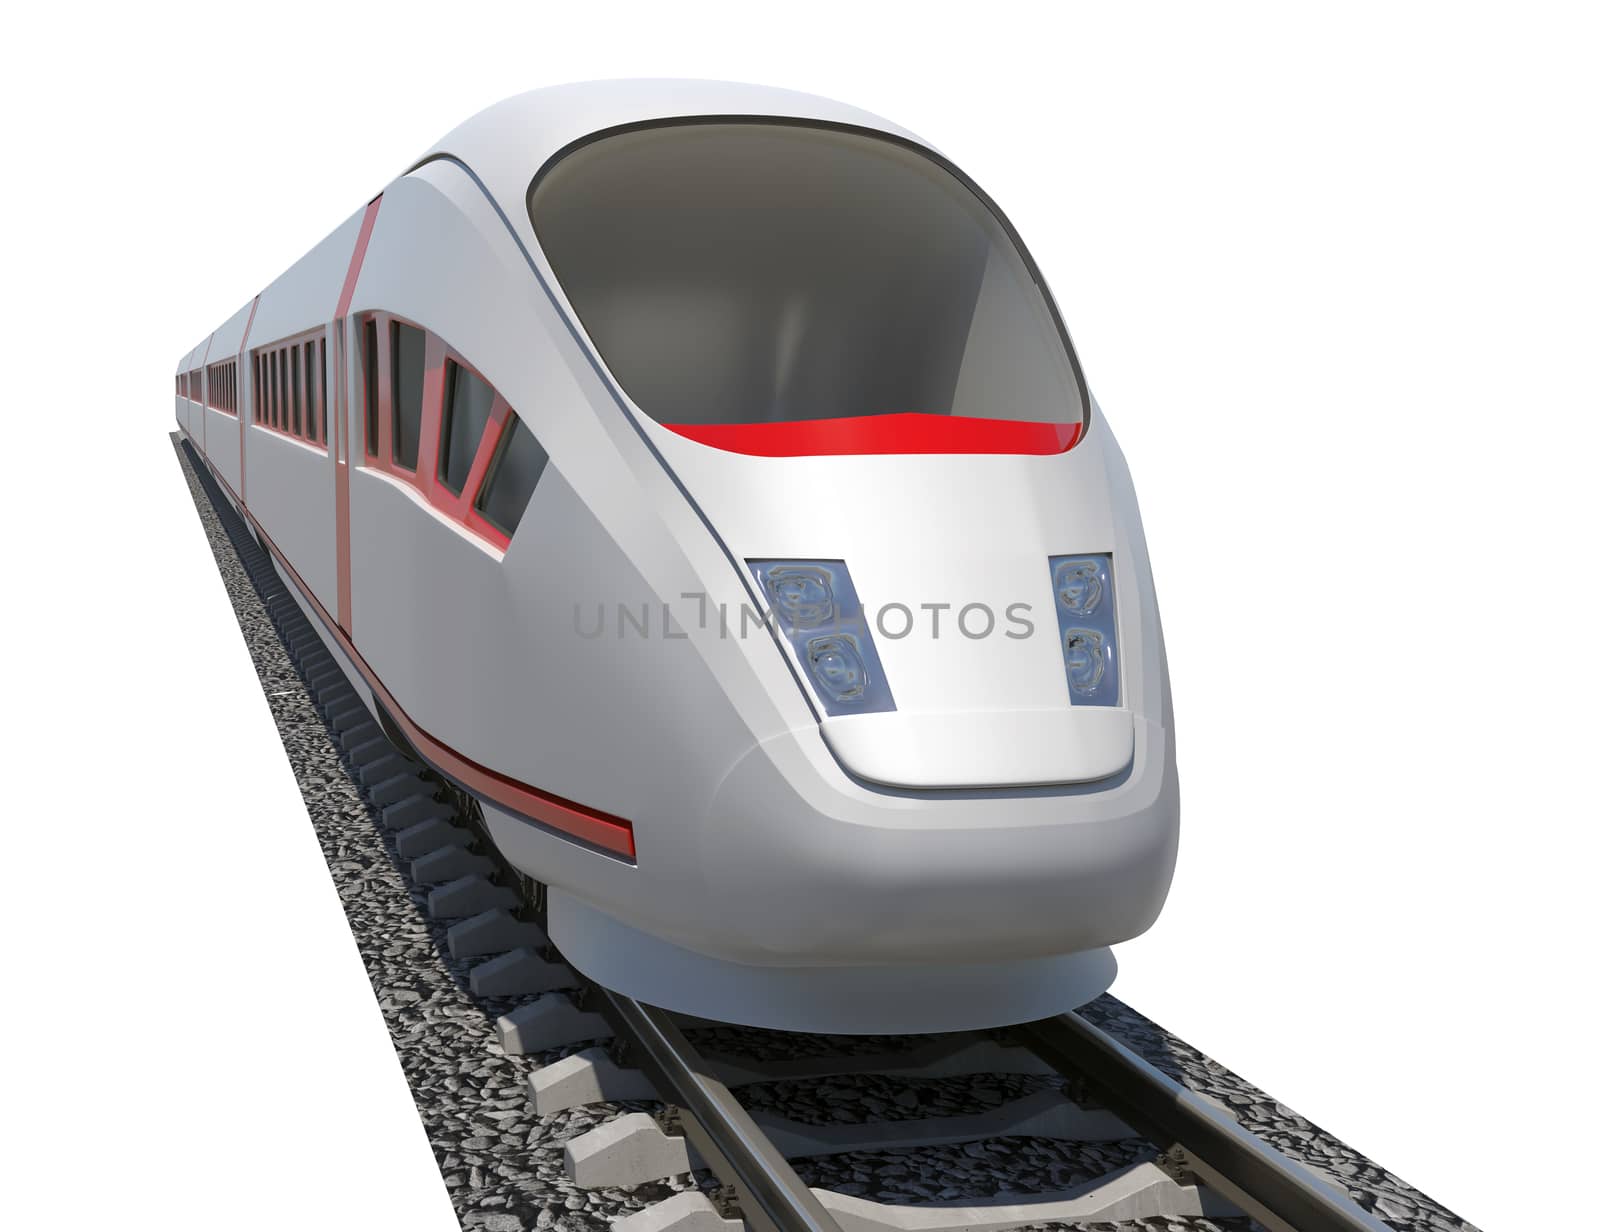 Train on isolated white background, side view